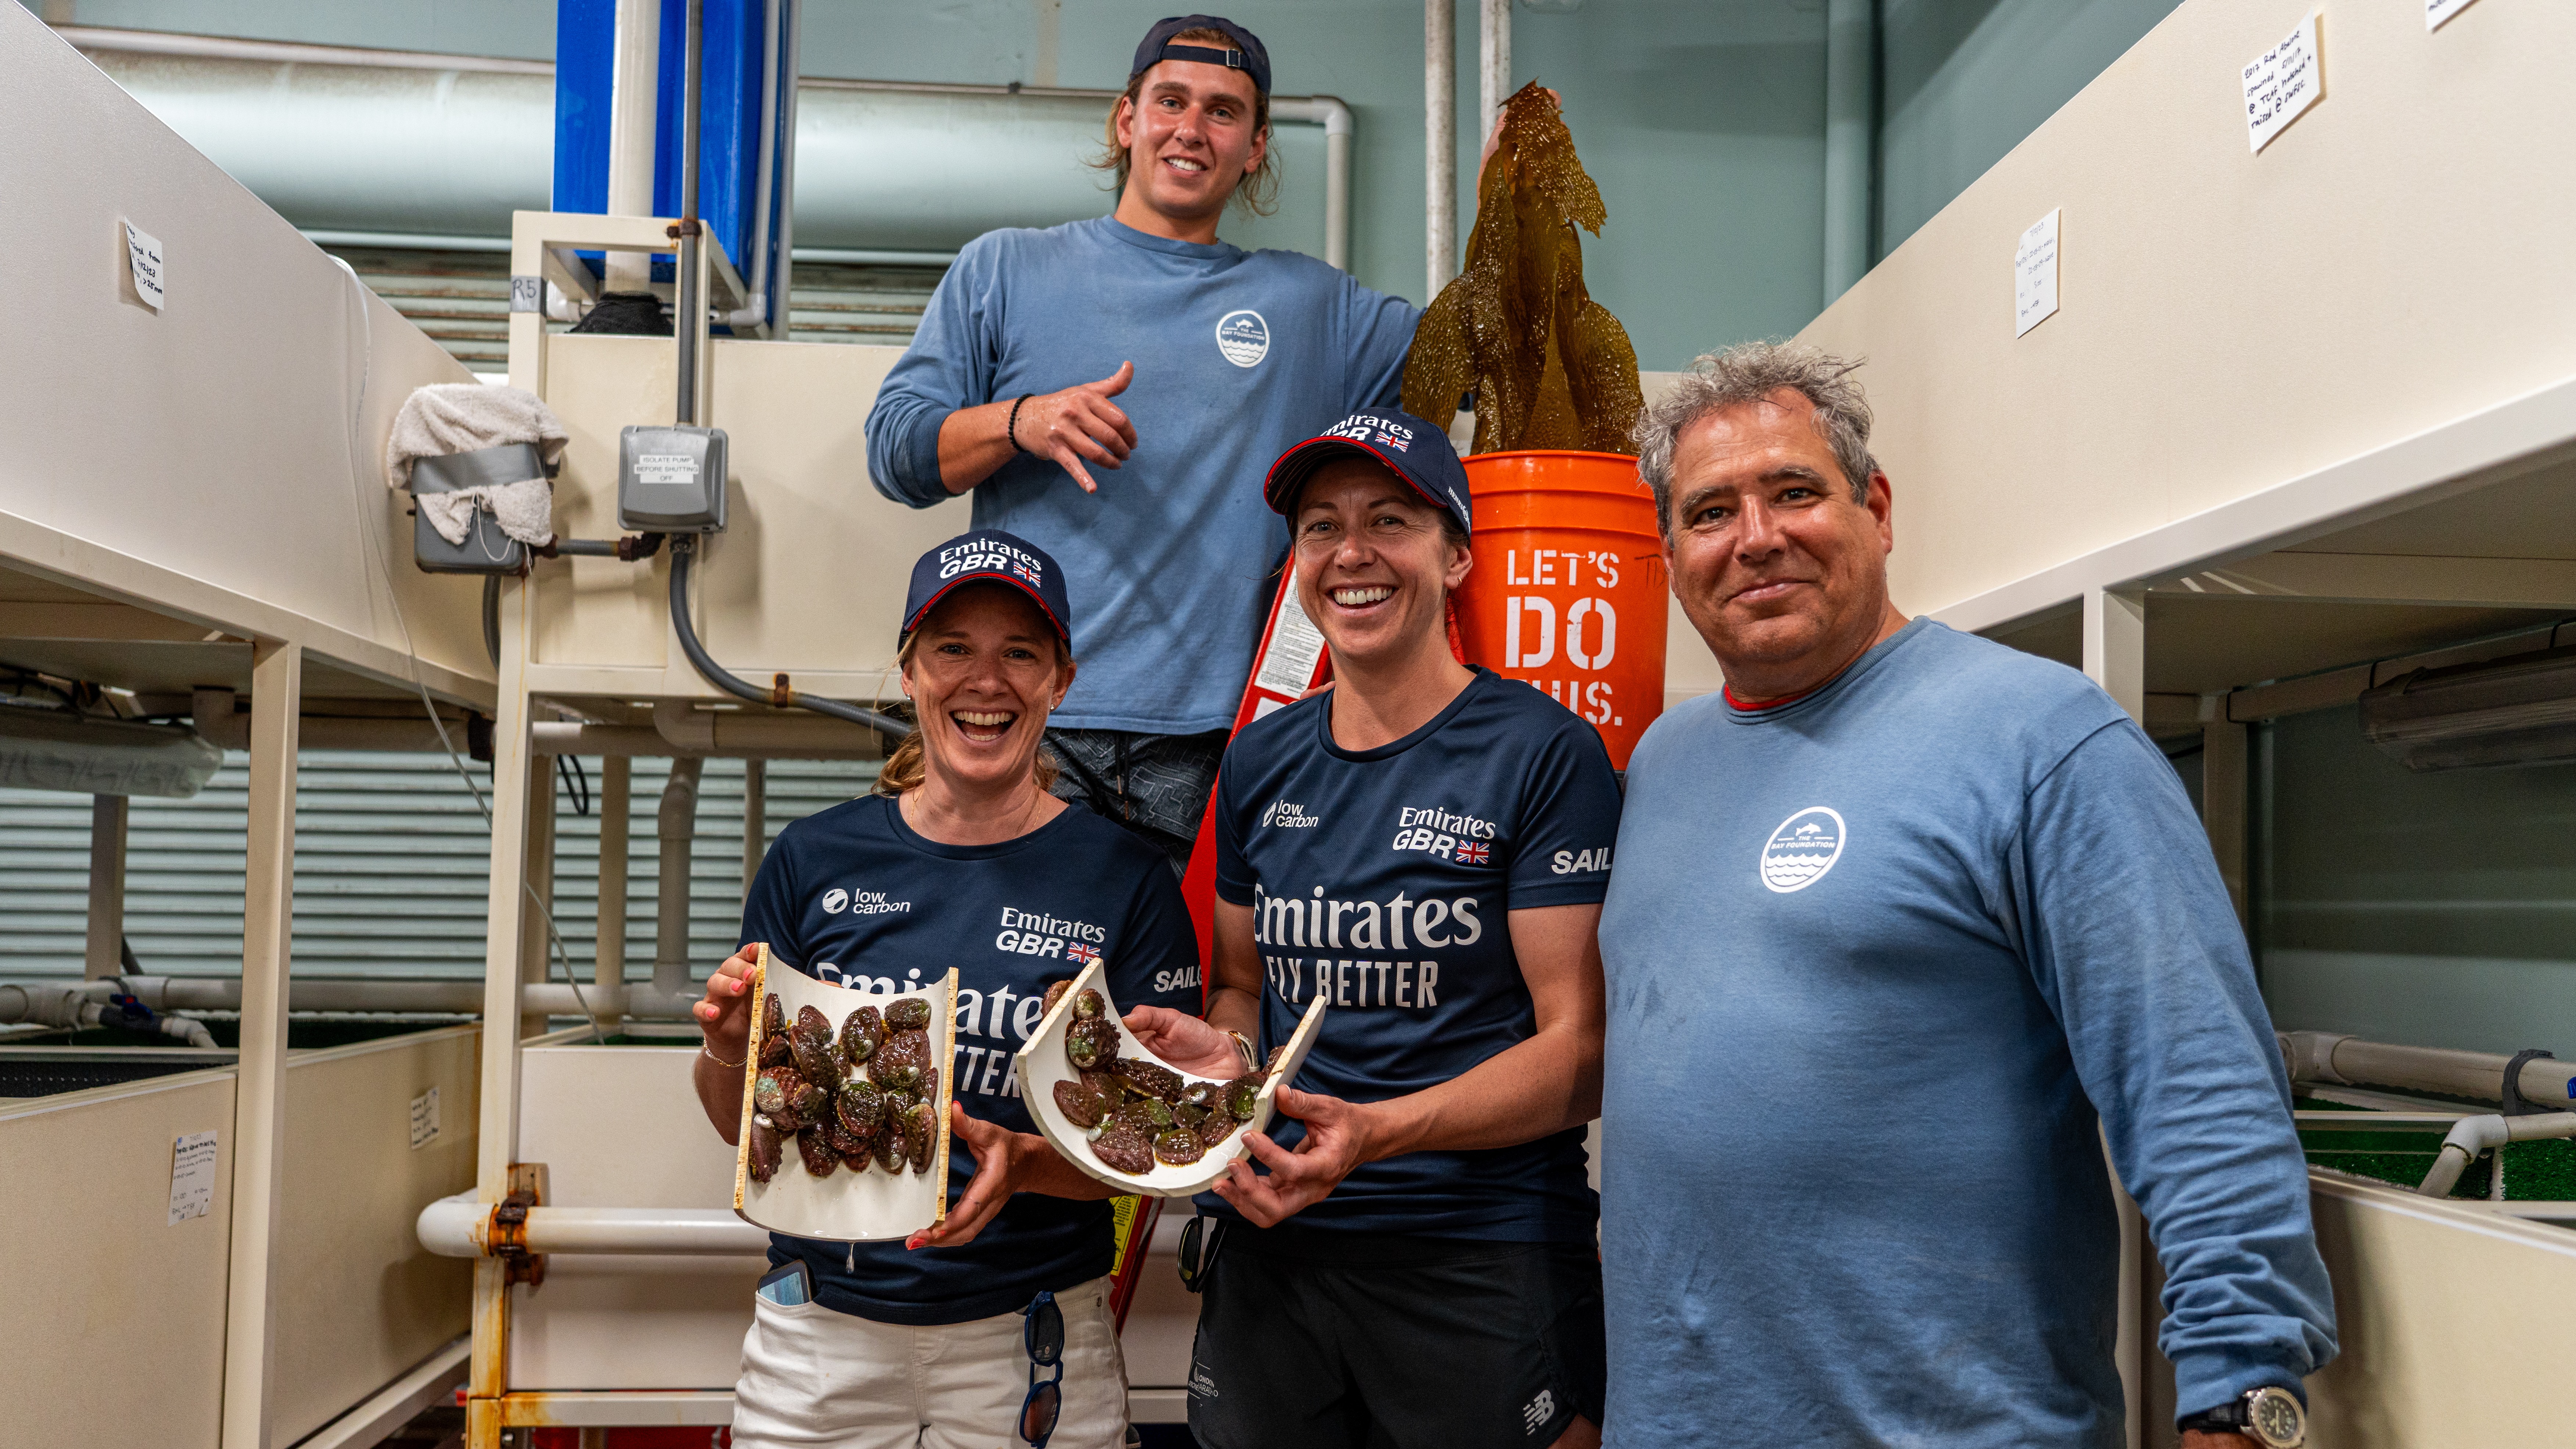 Season 4 // SailGP athletes pose with white abalone in Los Angeles